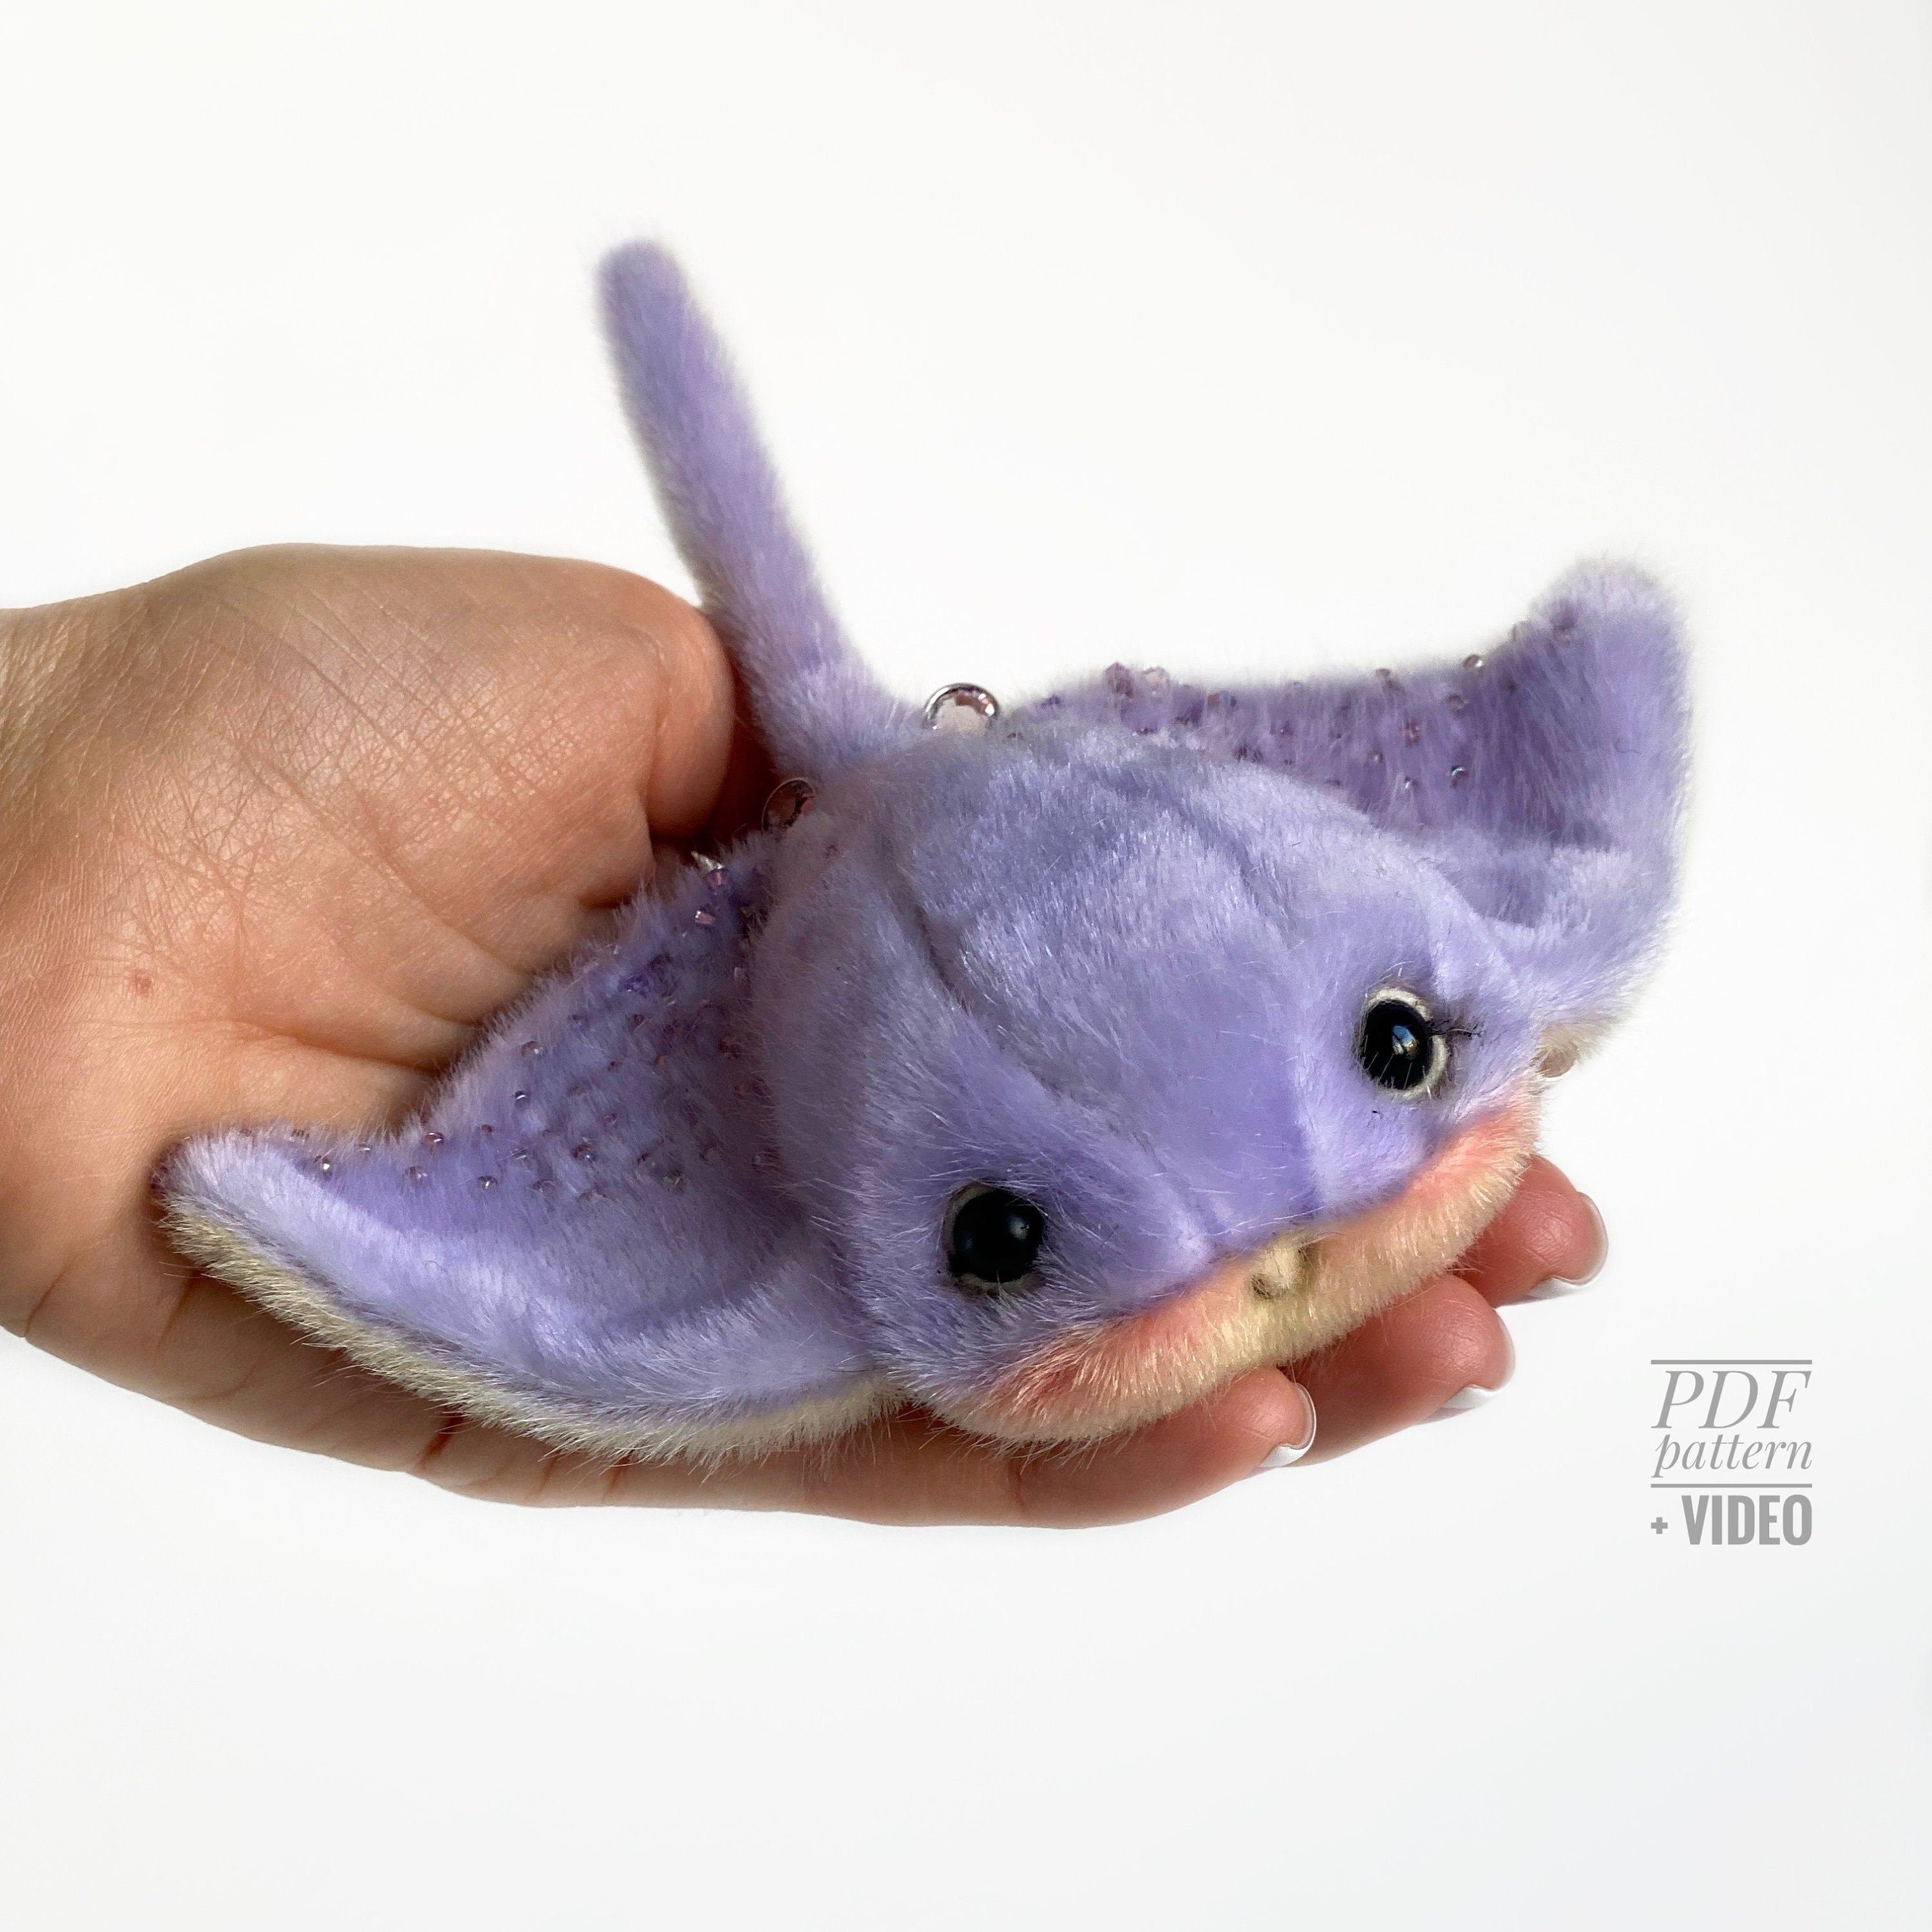 4 in 1 PATTERN Ocean Sea animals 2 Axolotl Seahorse Sting Ray Octopus PDF sewing patterns Video tutorial DIY stuffed toy kids easy to sew